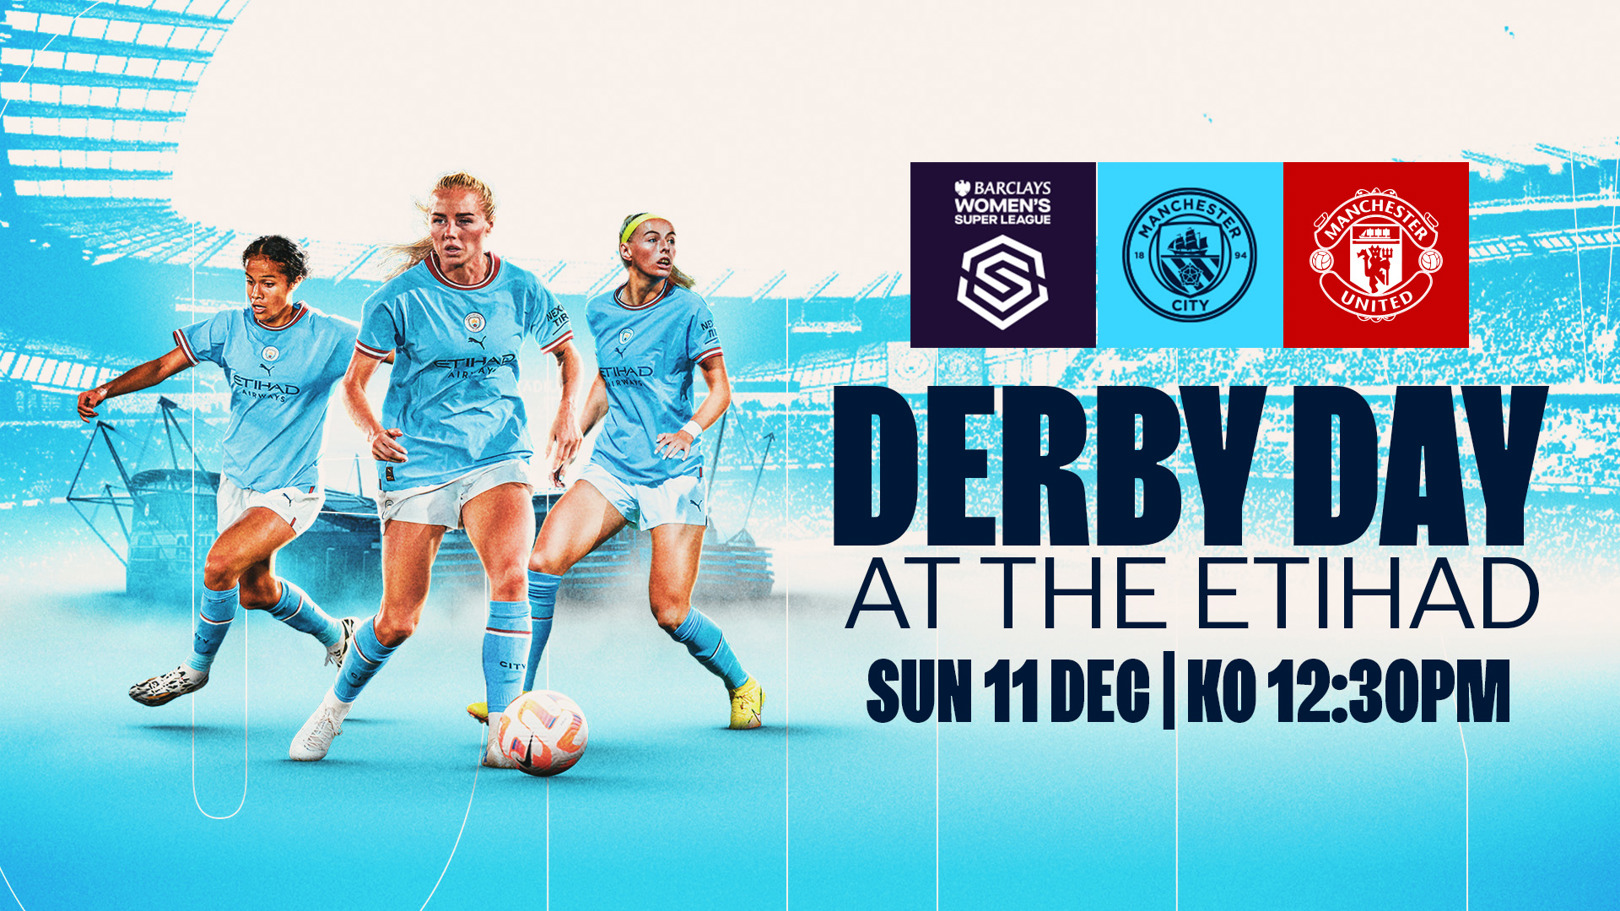 Tickets selling fast for WSL Etihad derby